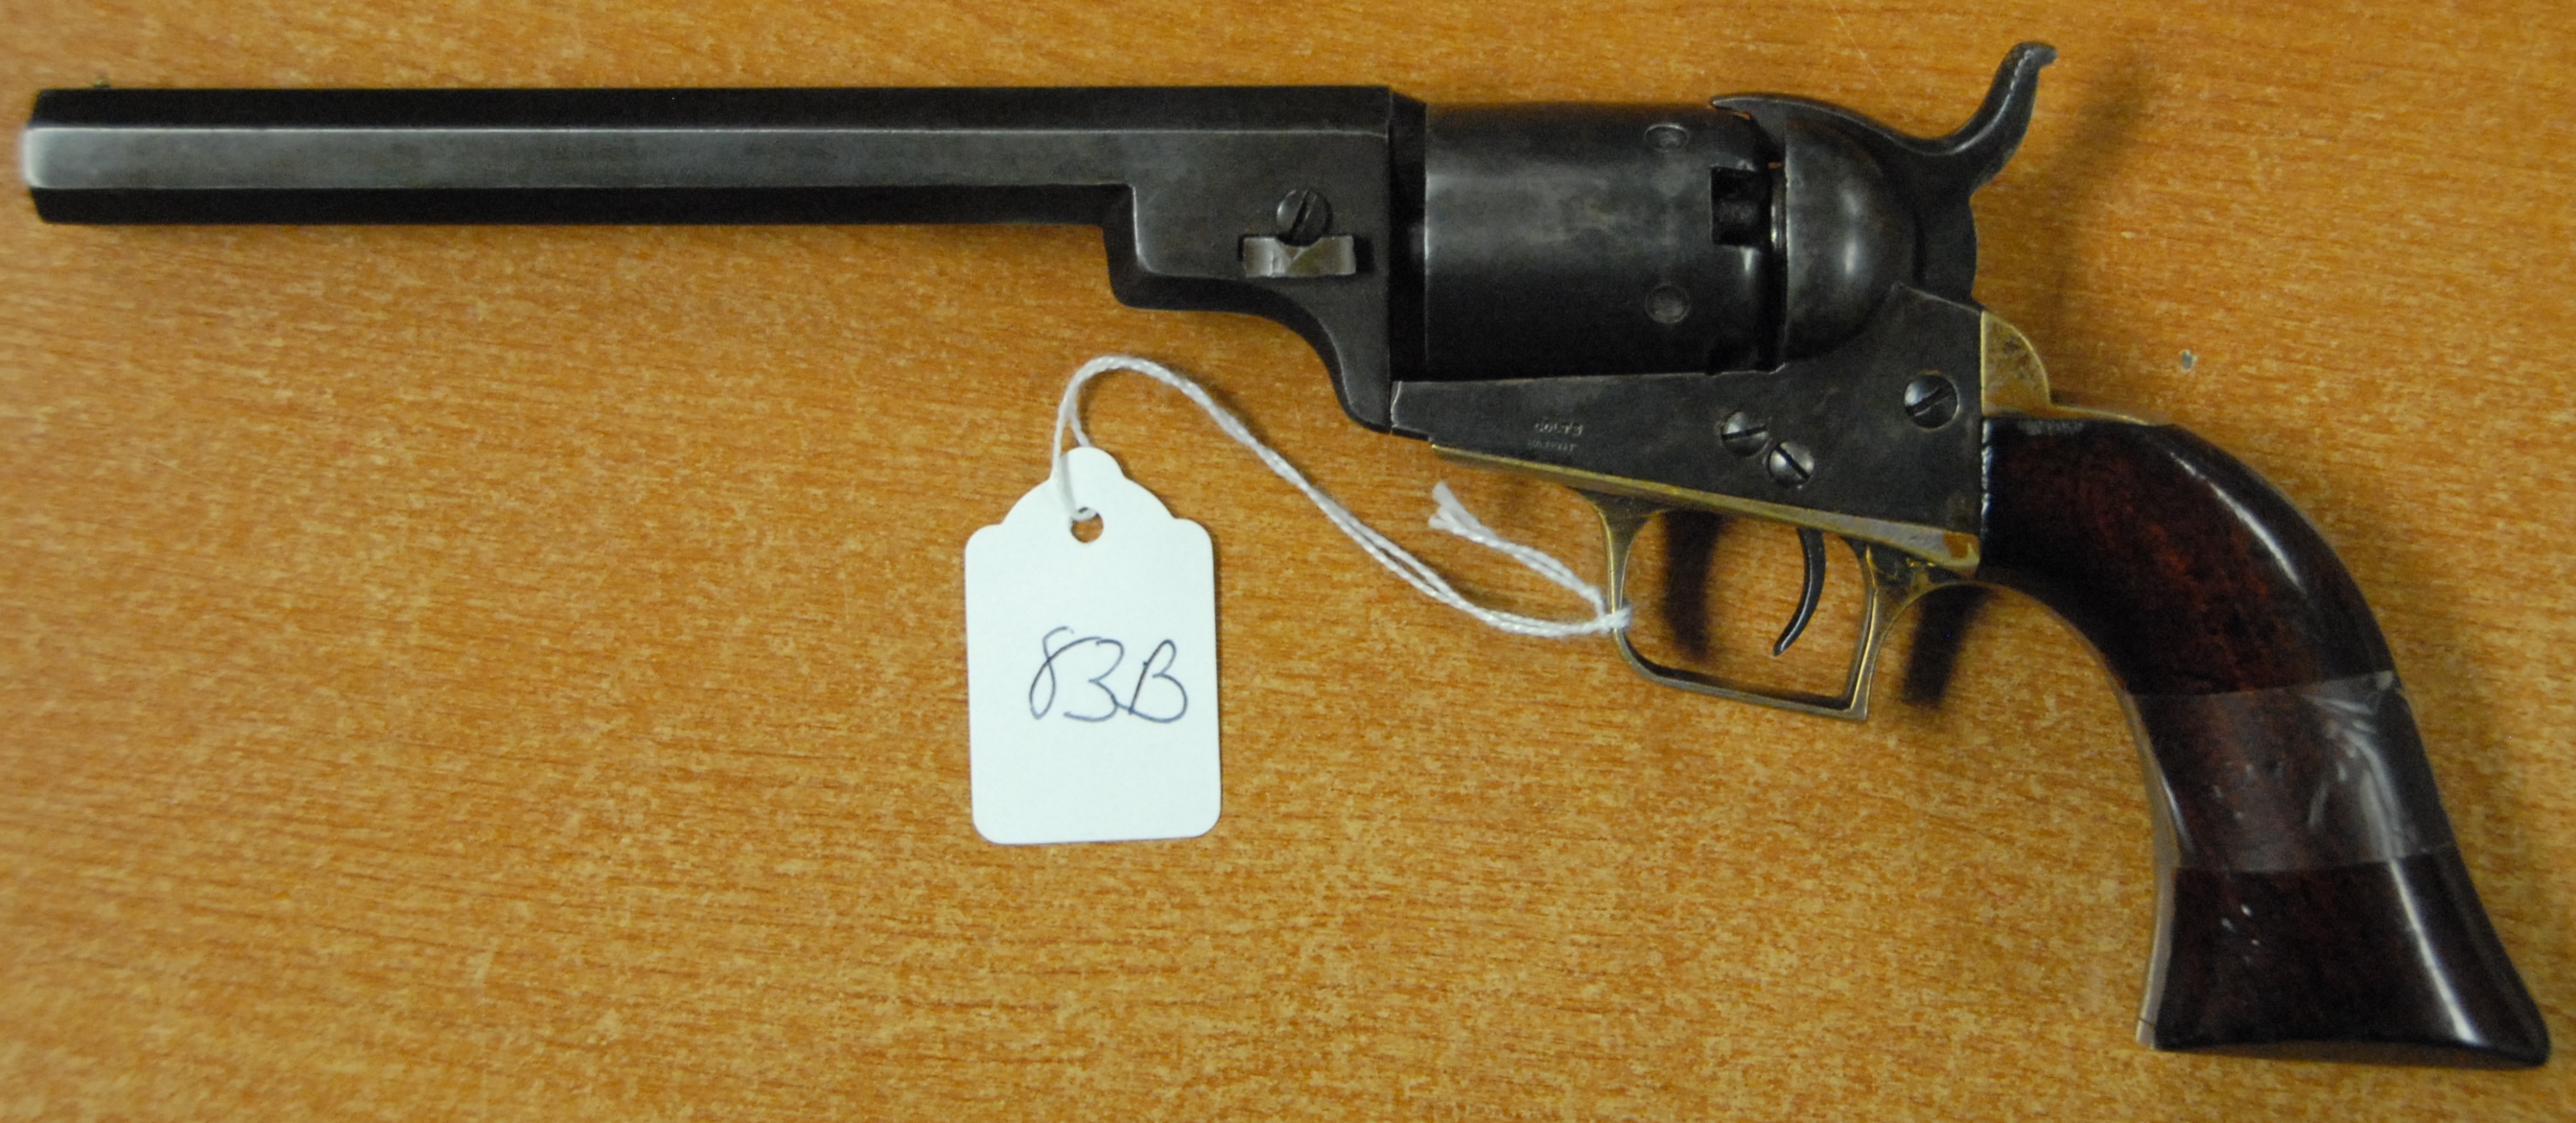 Estates, Firearms, & Sporting Auction Saturday November 8th @ 10:30am #1120